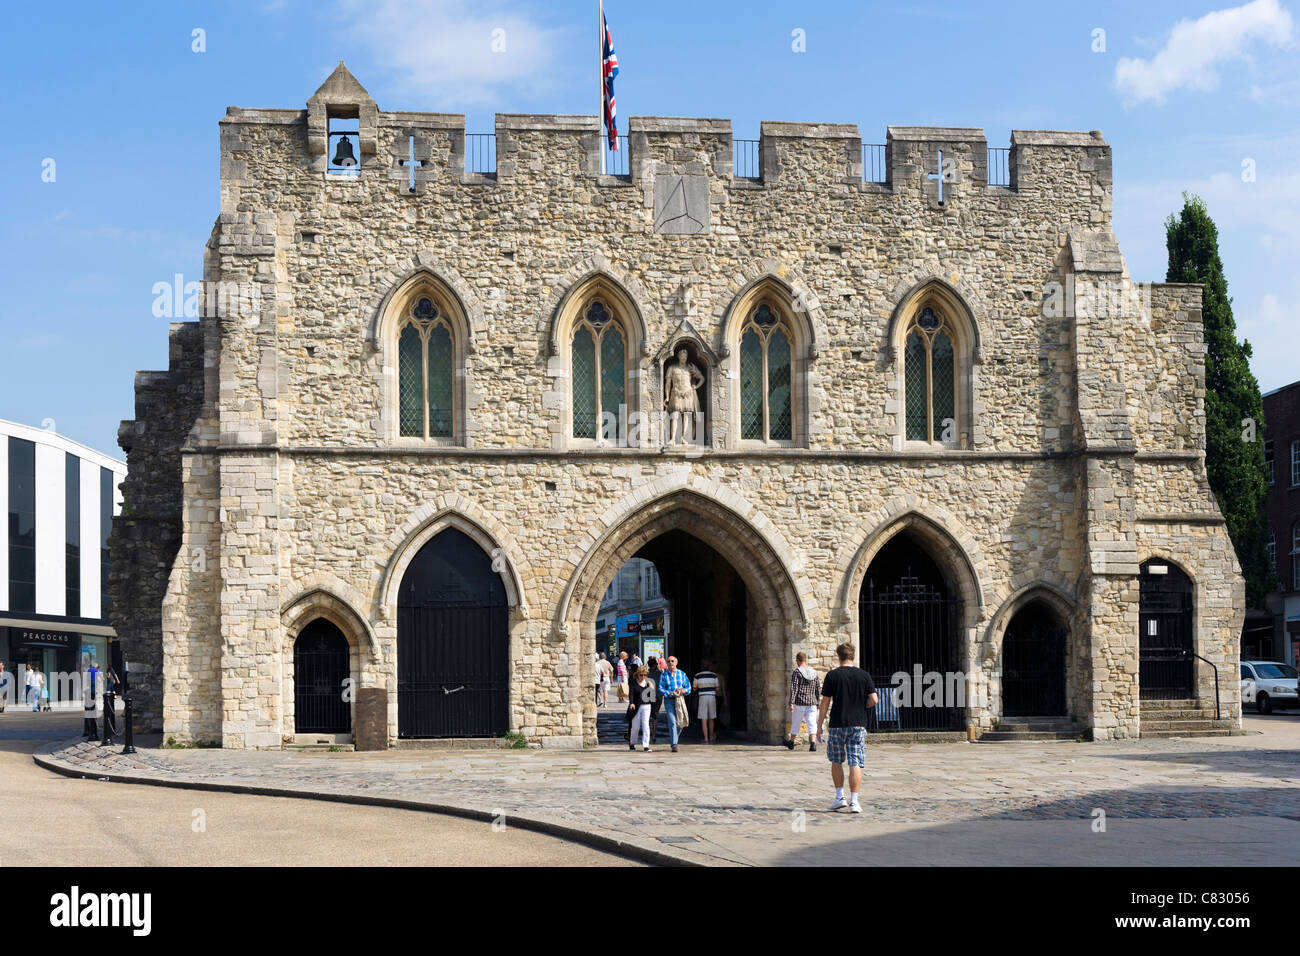 The Bargate medieval gateway in the city centre, Southampton, Hampshire, England, UK Stock Photo